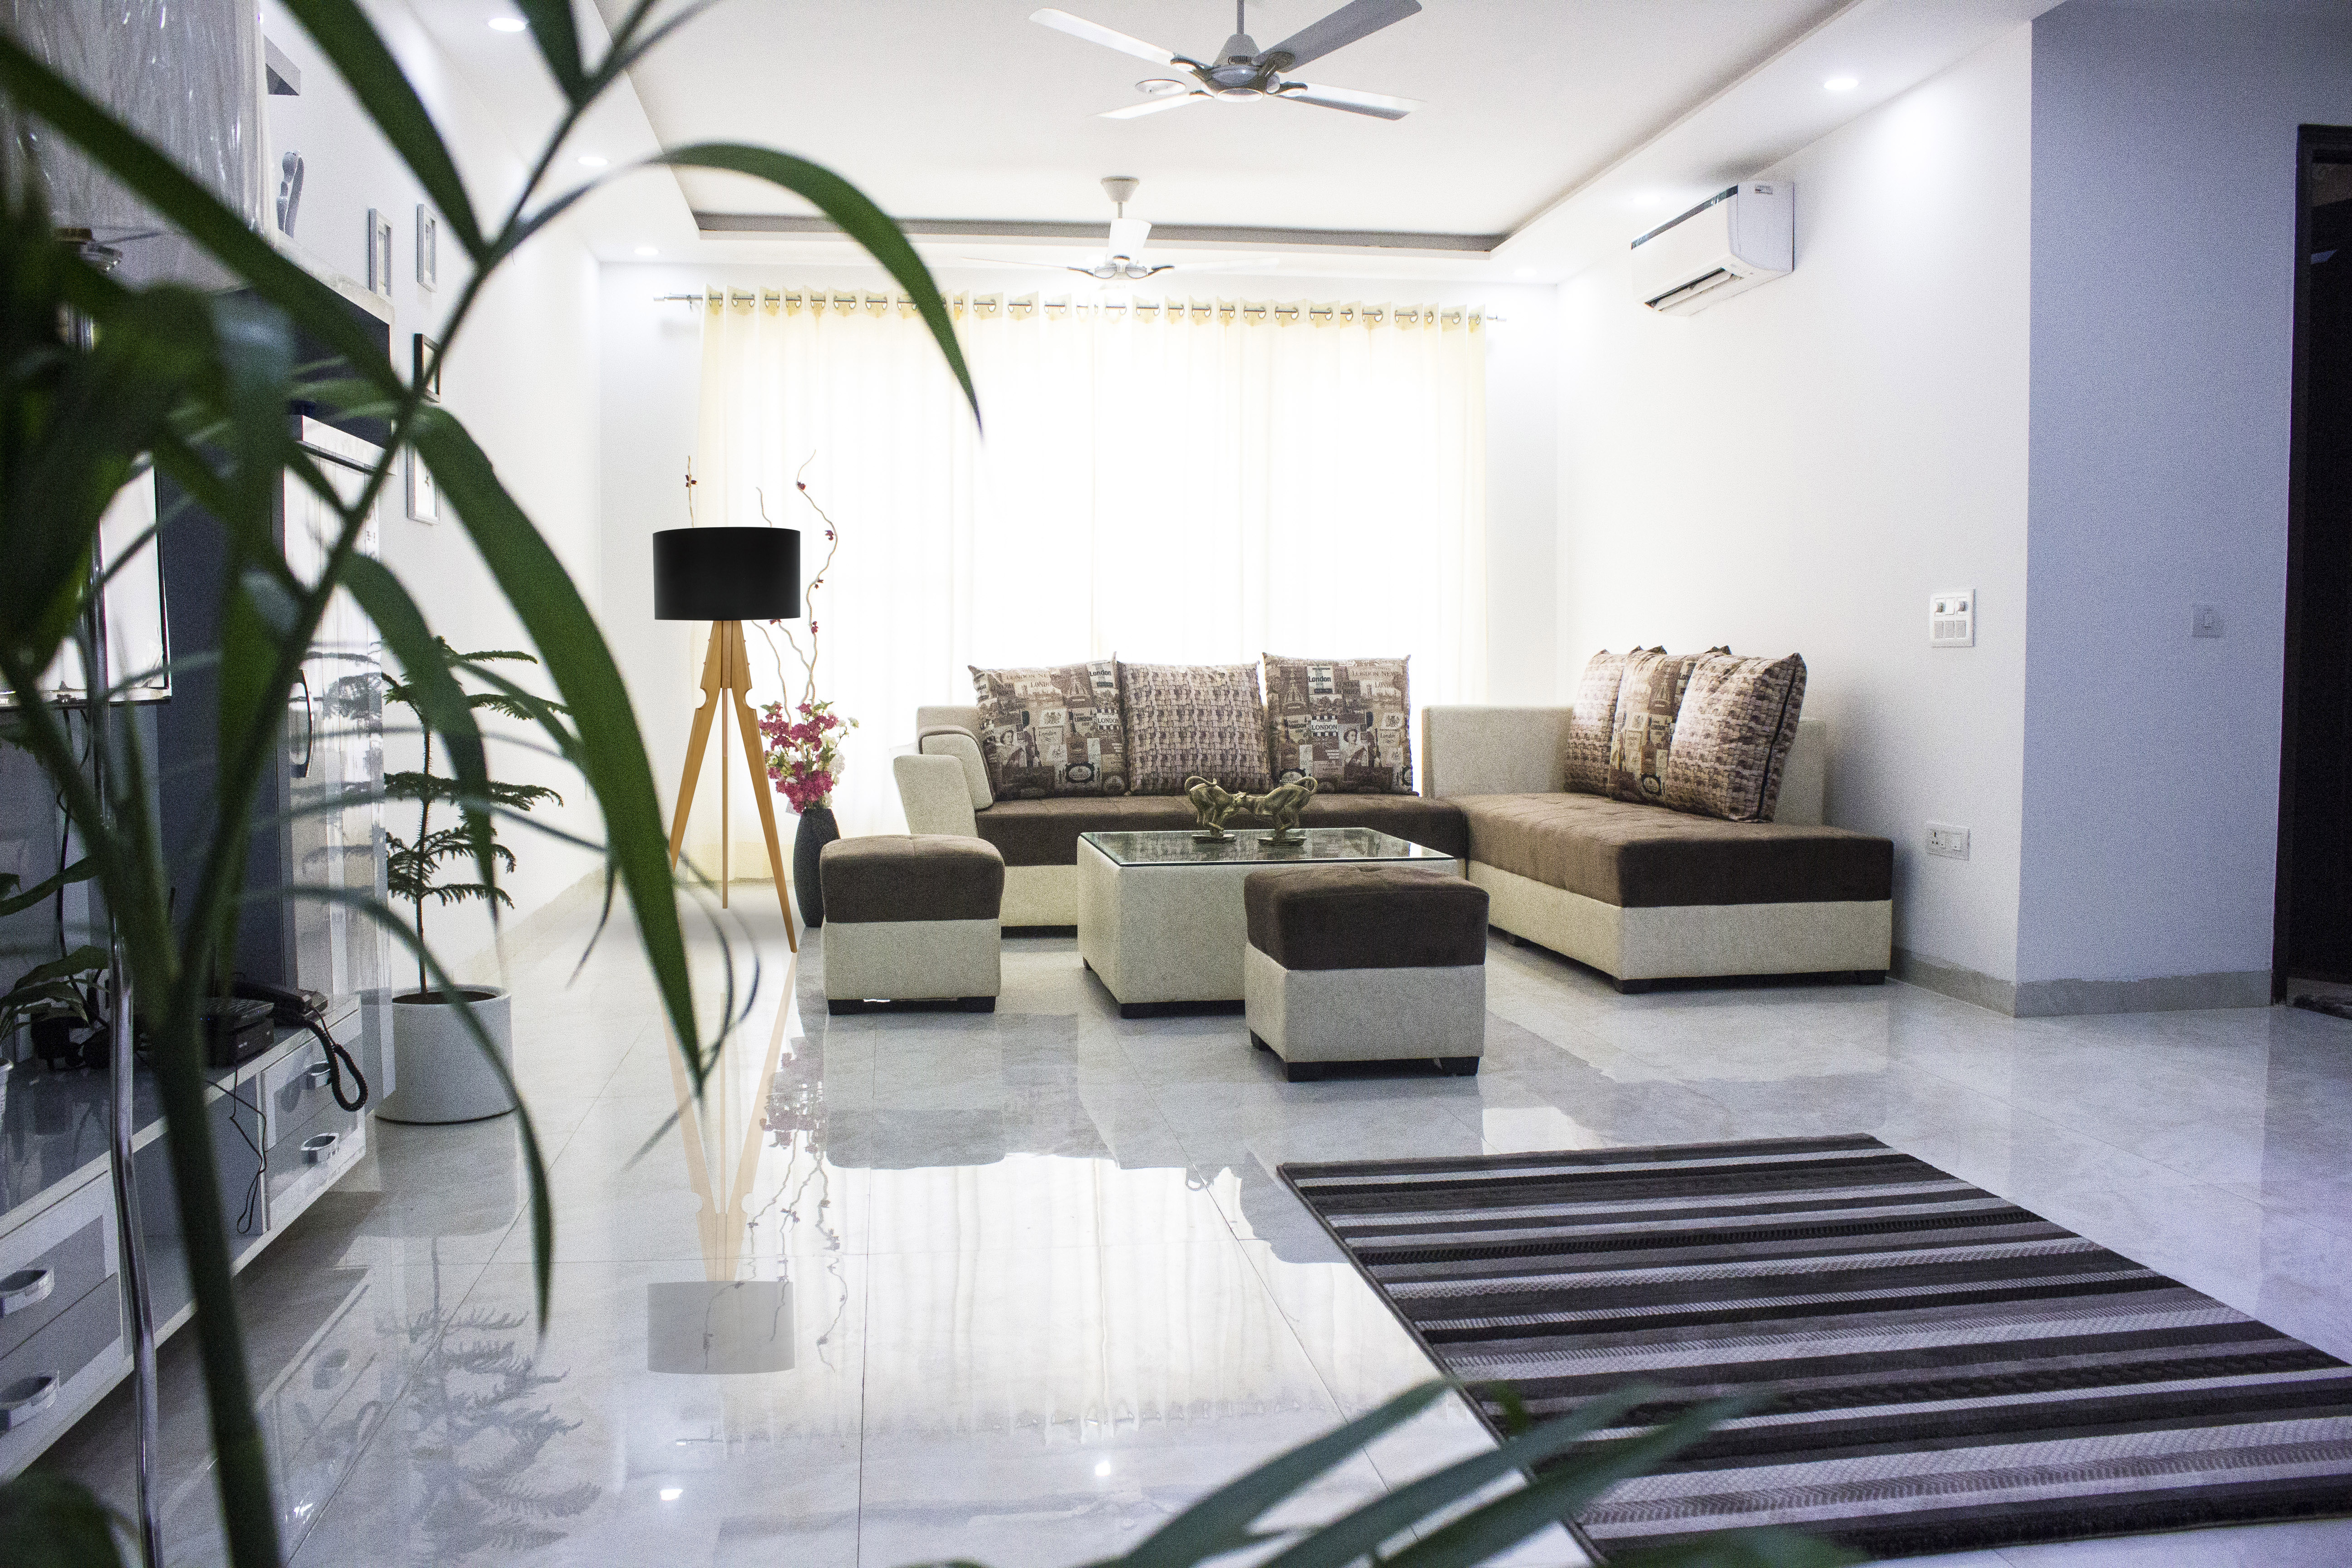 3 BR near fortis serviced apartment in gurgaon 